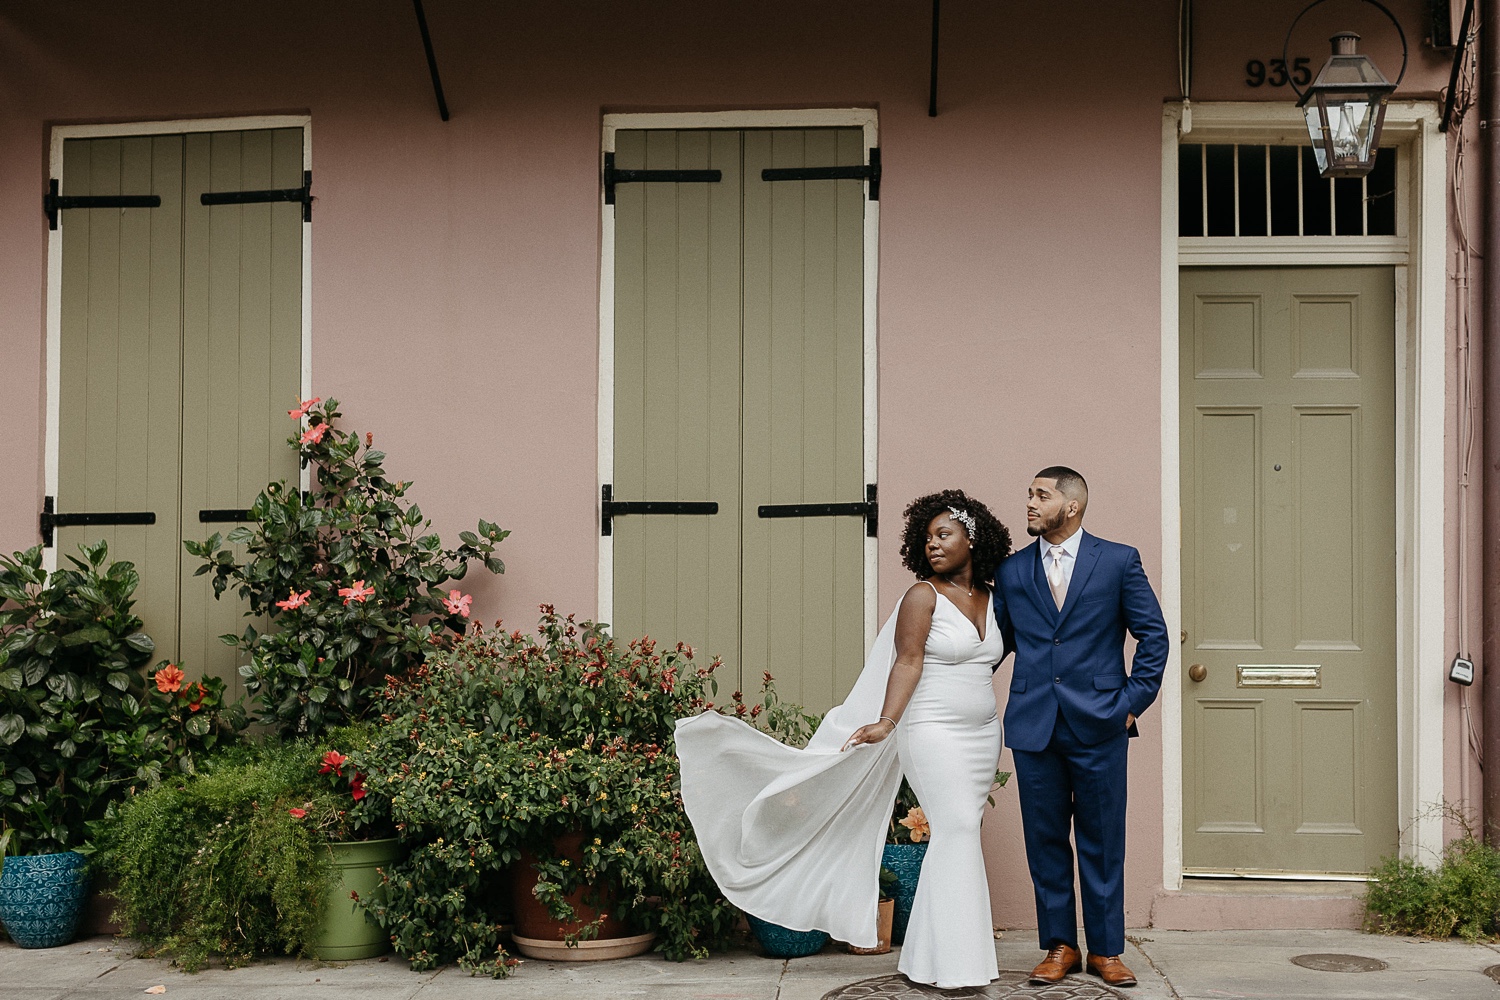 French Quarter Elopement photo in front of colorful building